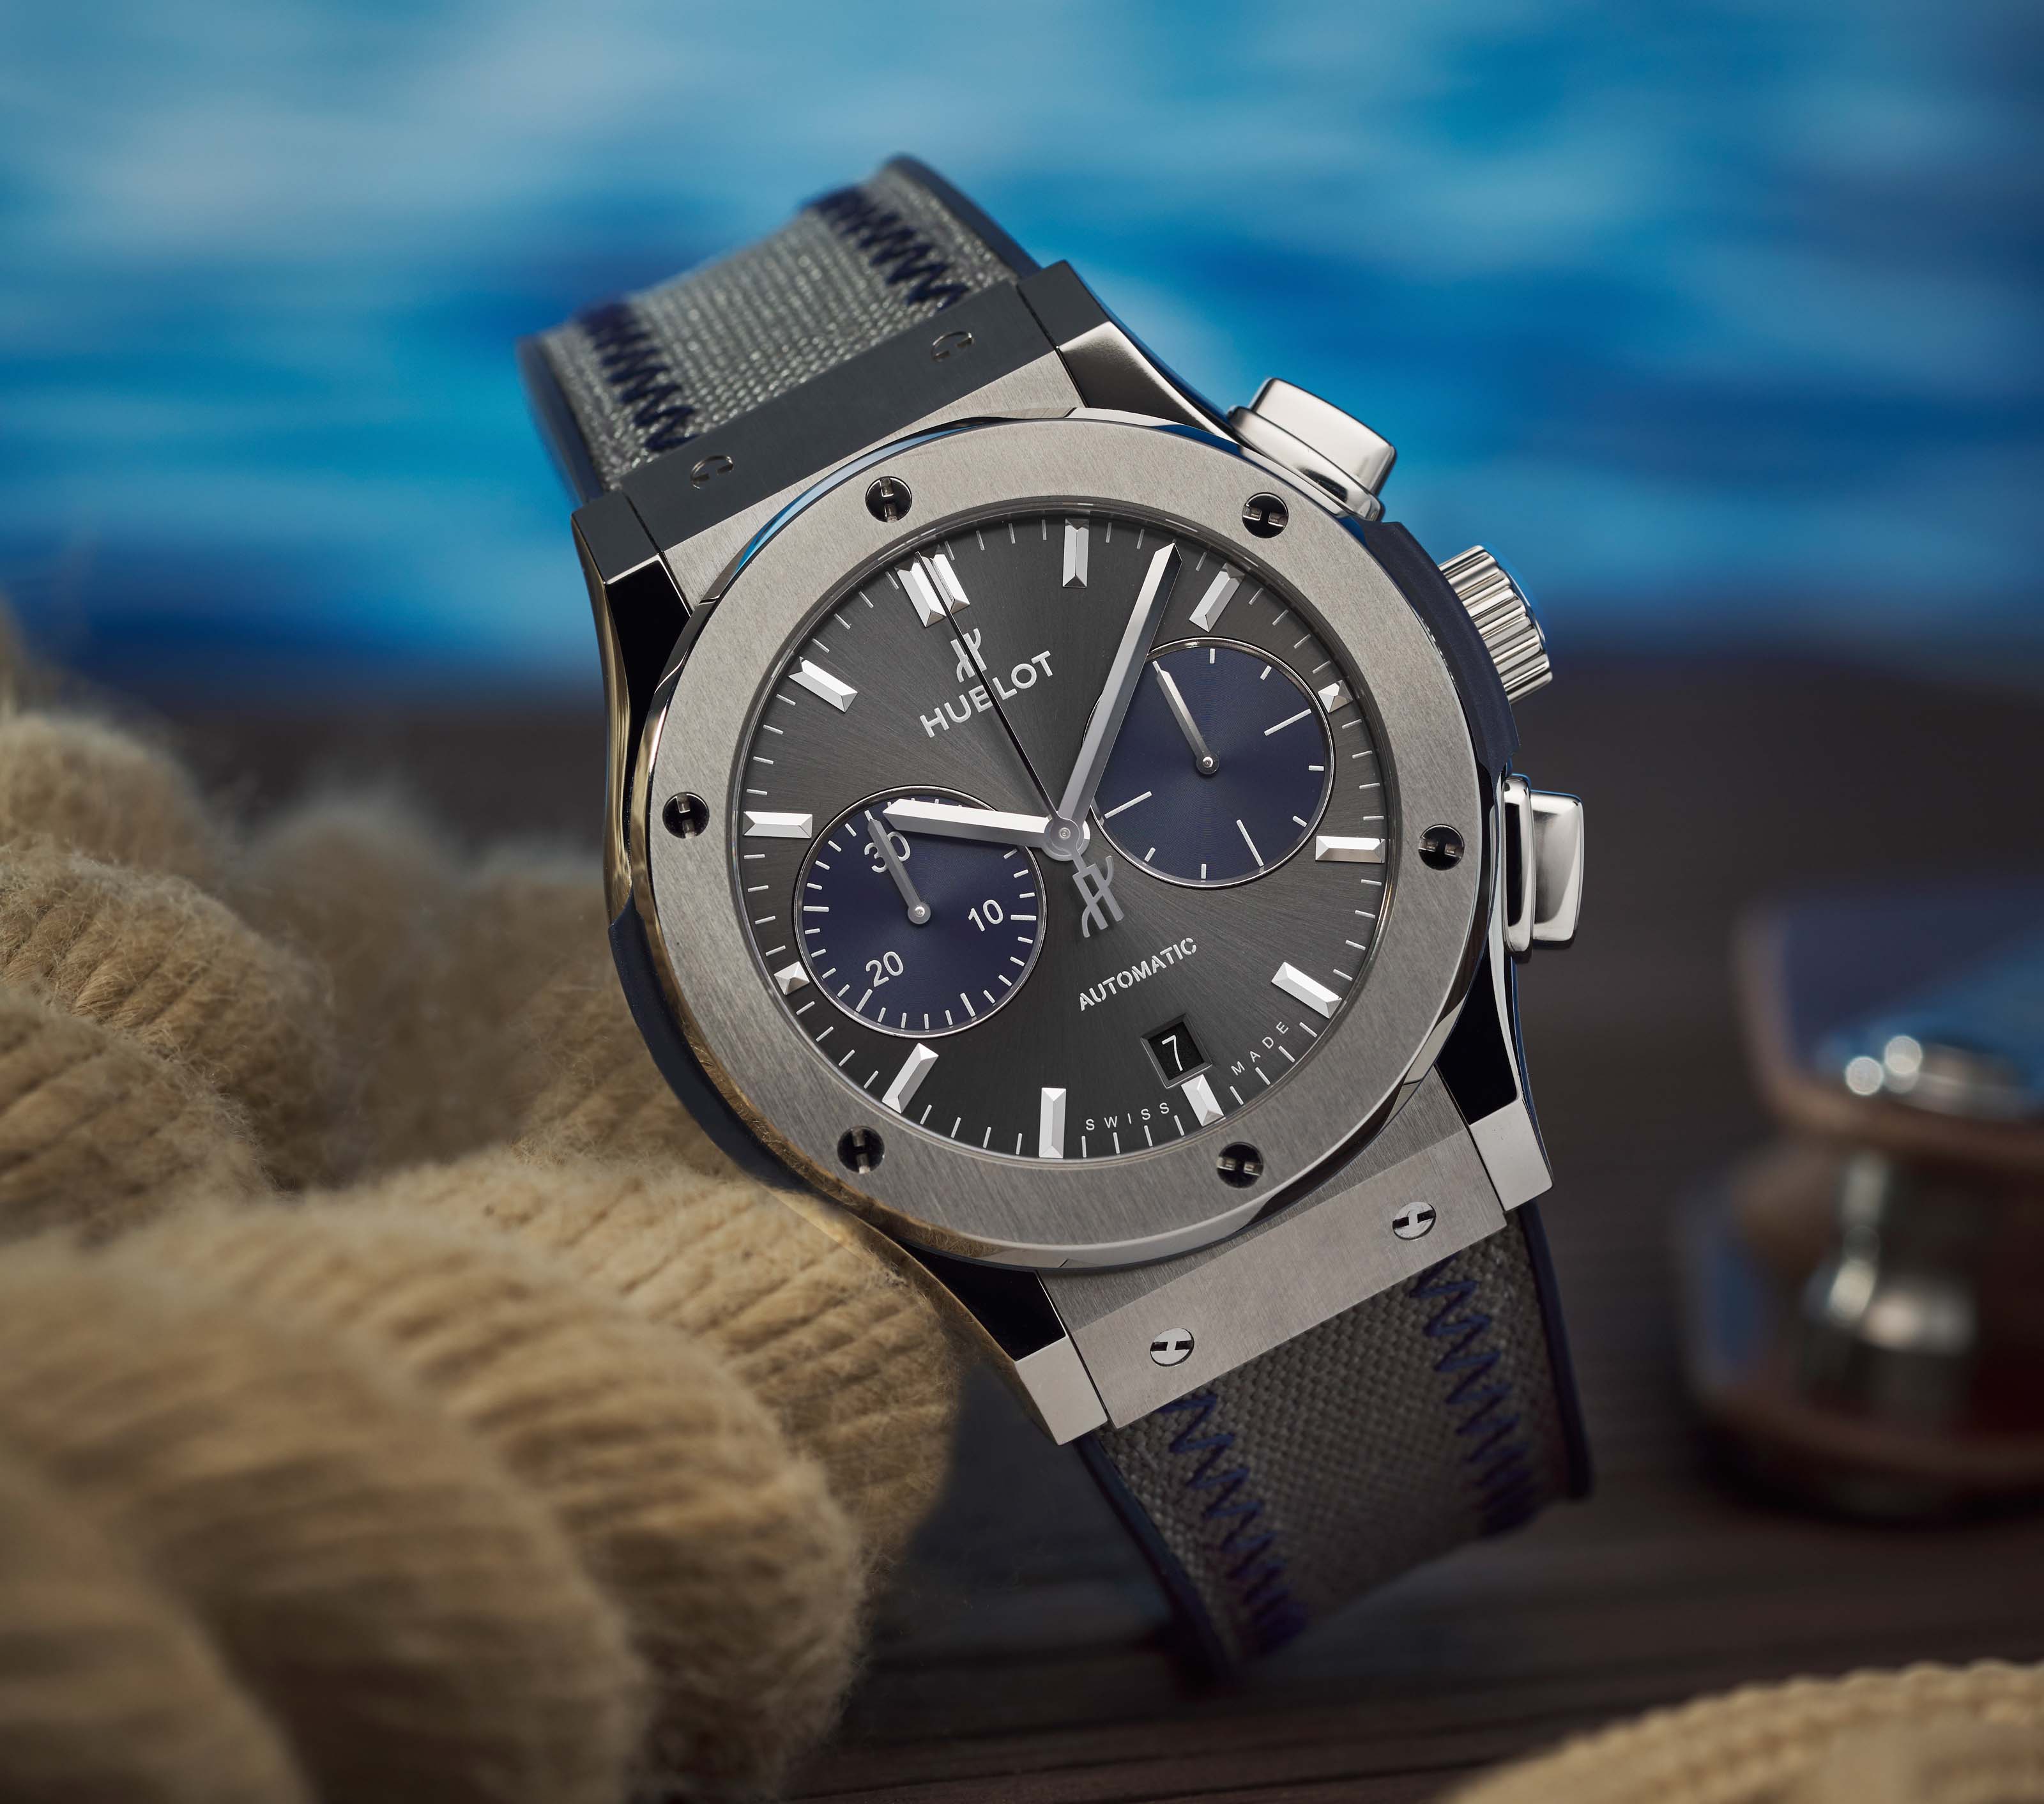 La Cote des Montres: Hublot Classic Fusion Chronograph Bol d'Or Mirabaud 2019 watch - Hublot, timekeeper of the world's most inland lake race for the 8th year